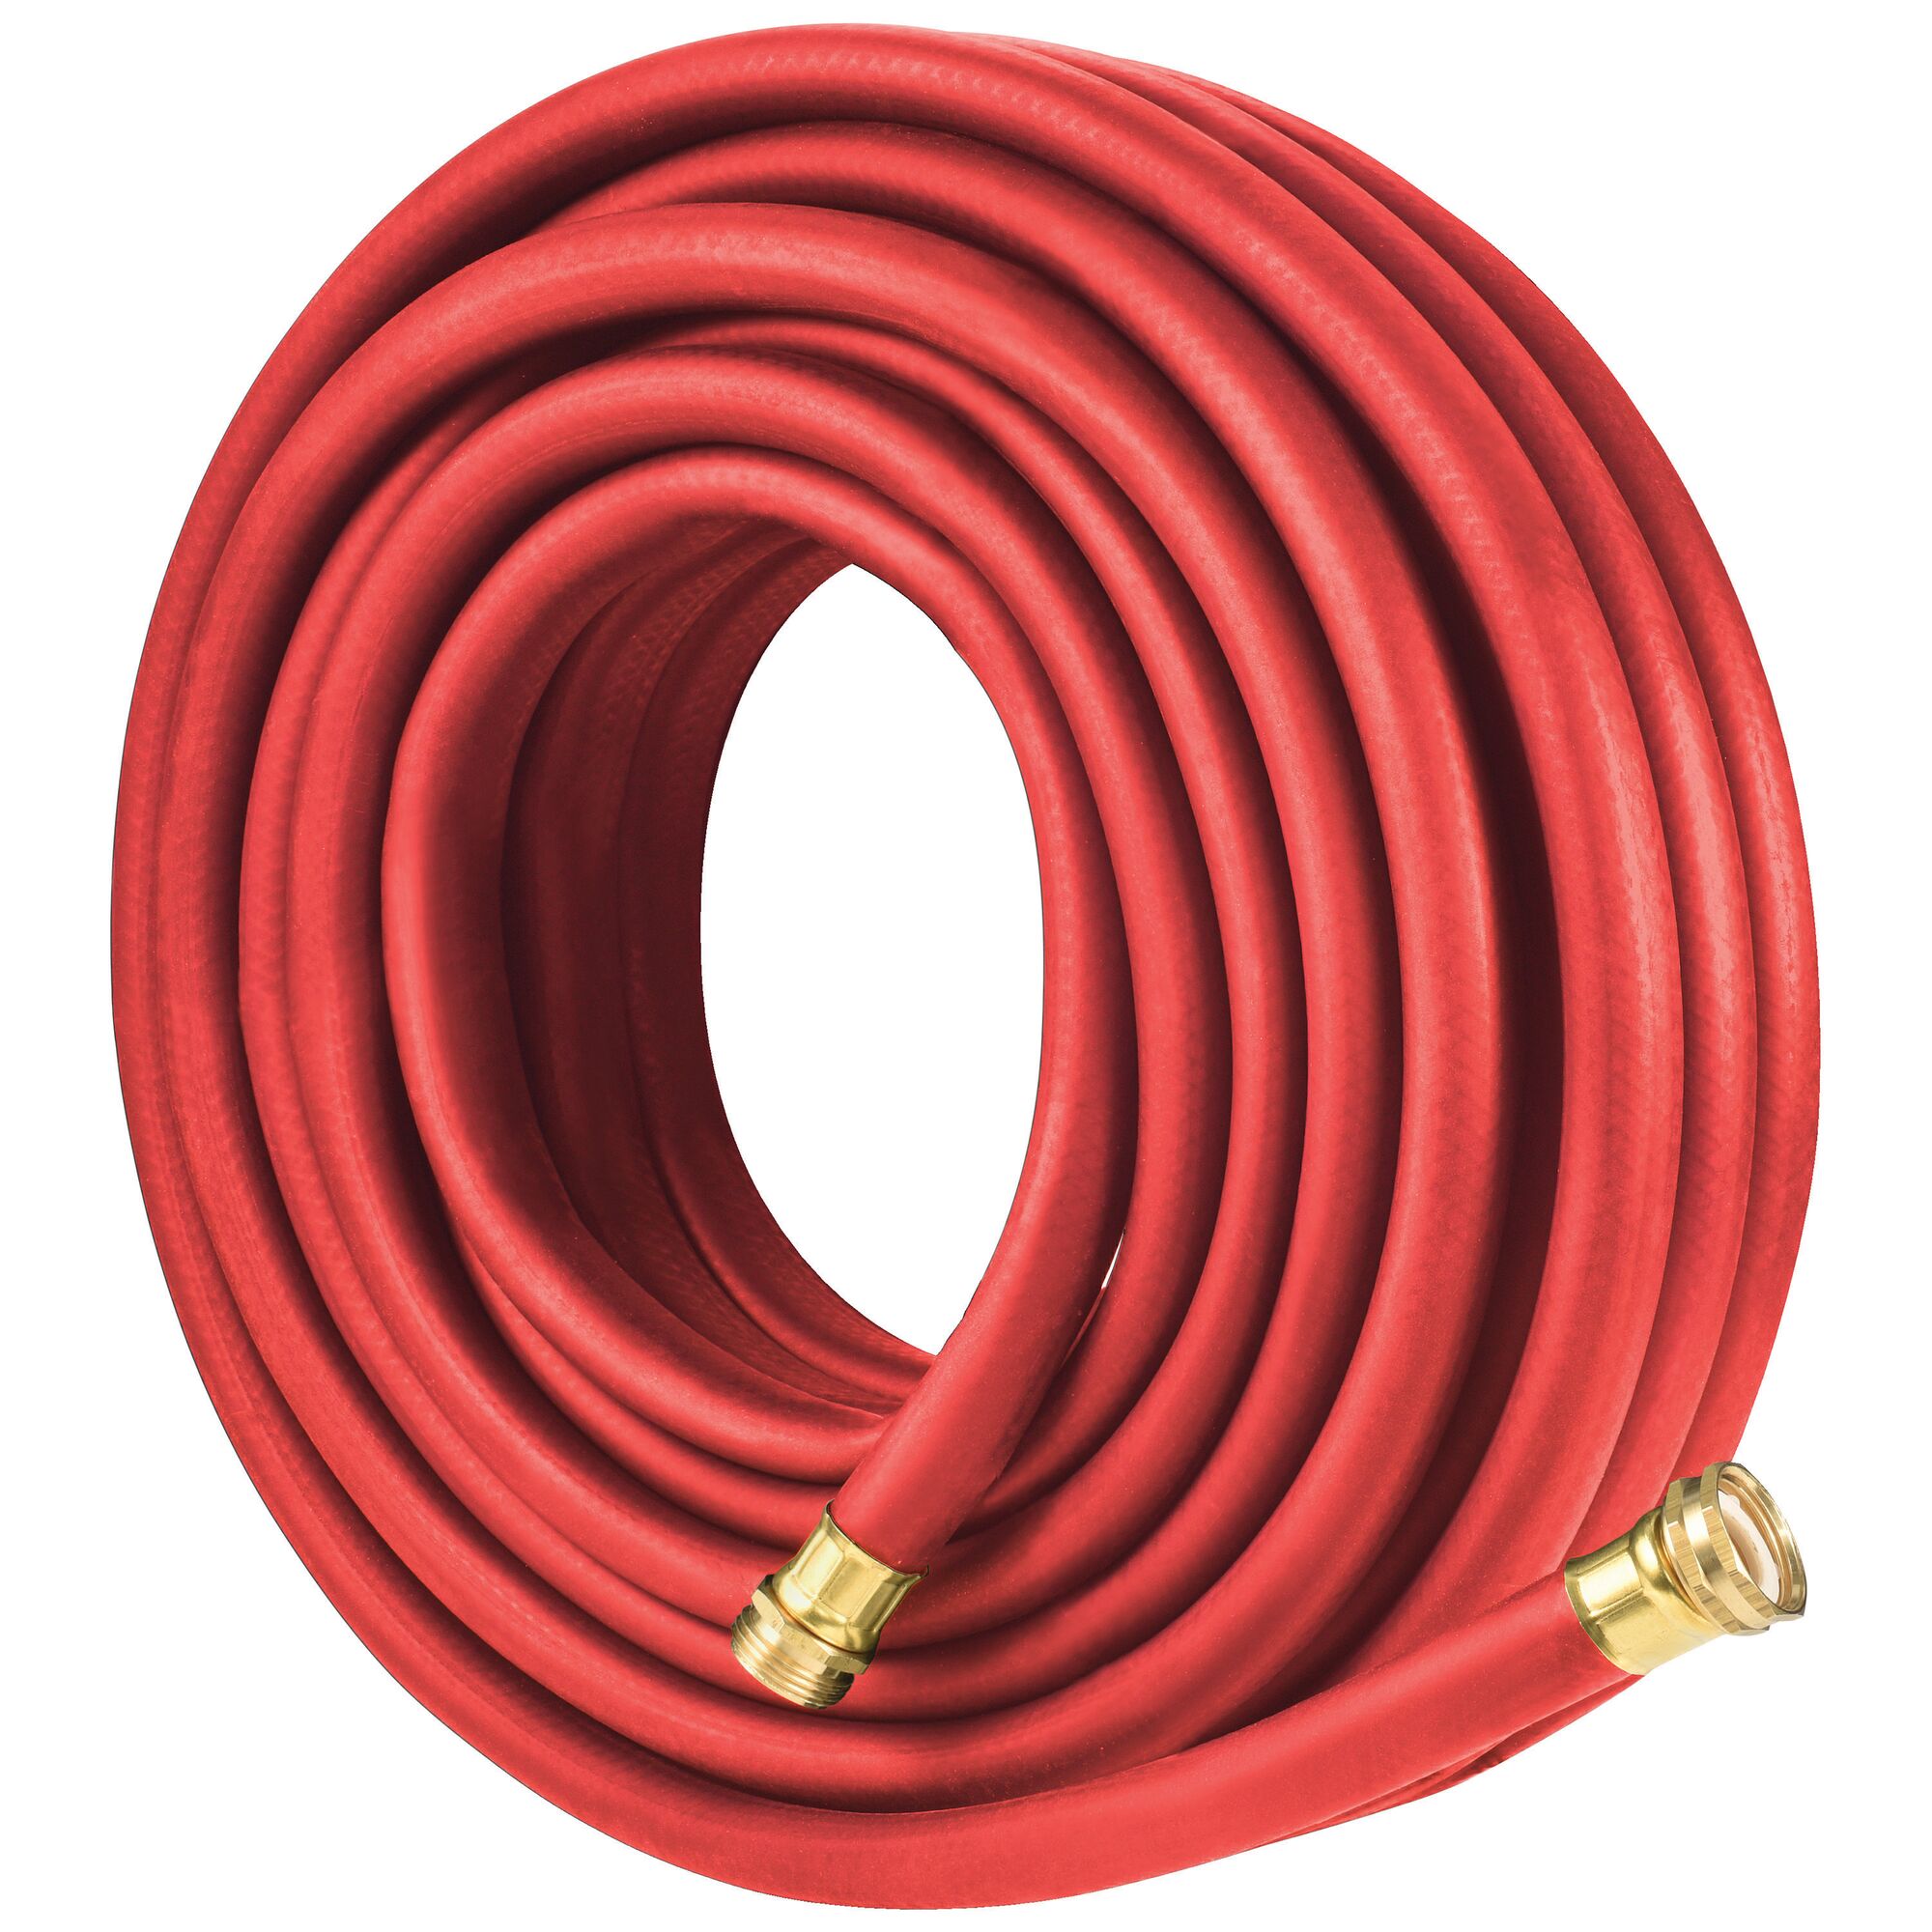 Profile of 50 feet hot water rubber hose.